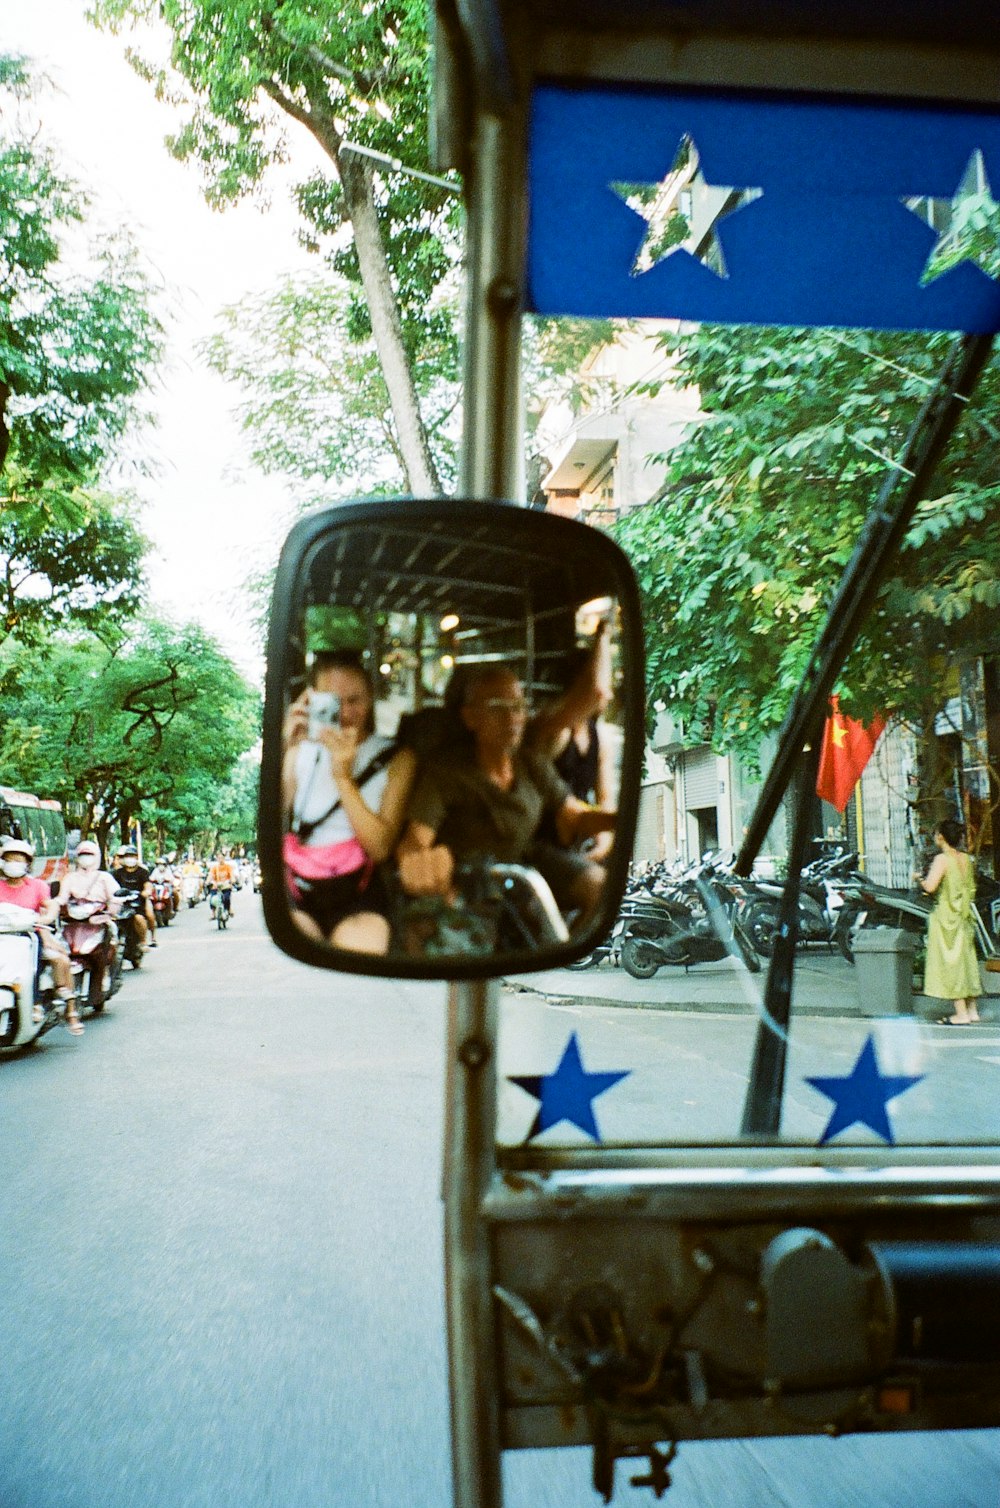 a rear view mirror of a bus with people in it